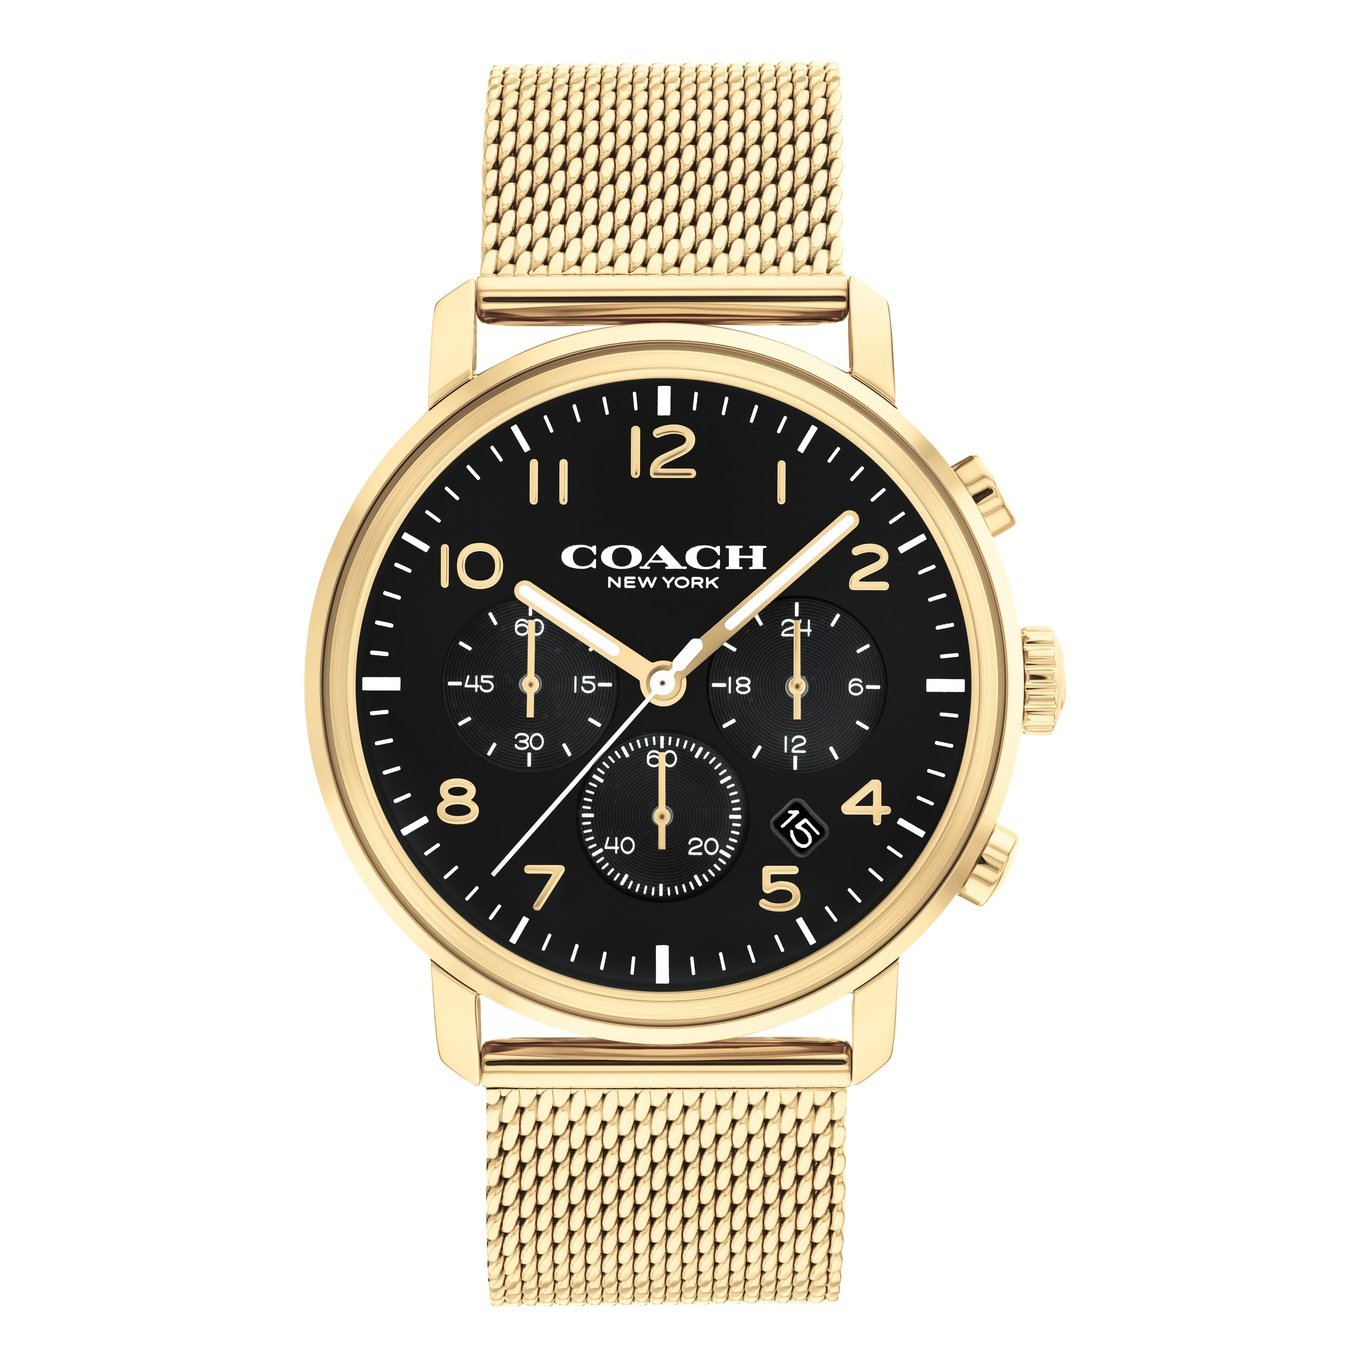 Coach Watches For Men and Women | Shop Online Now – Page 2